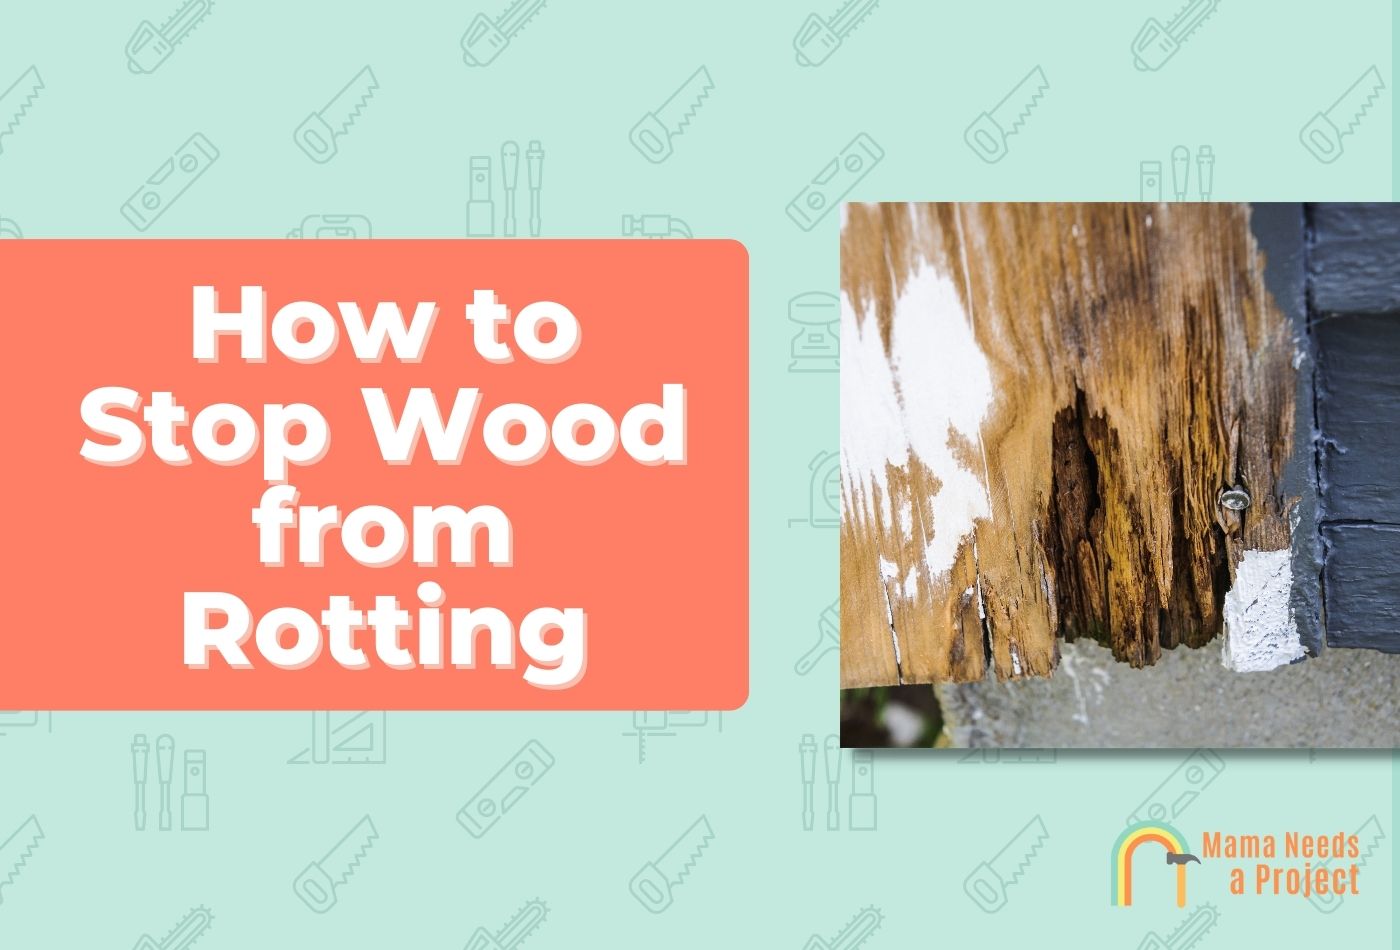 How to Stop Wood from Rotting